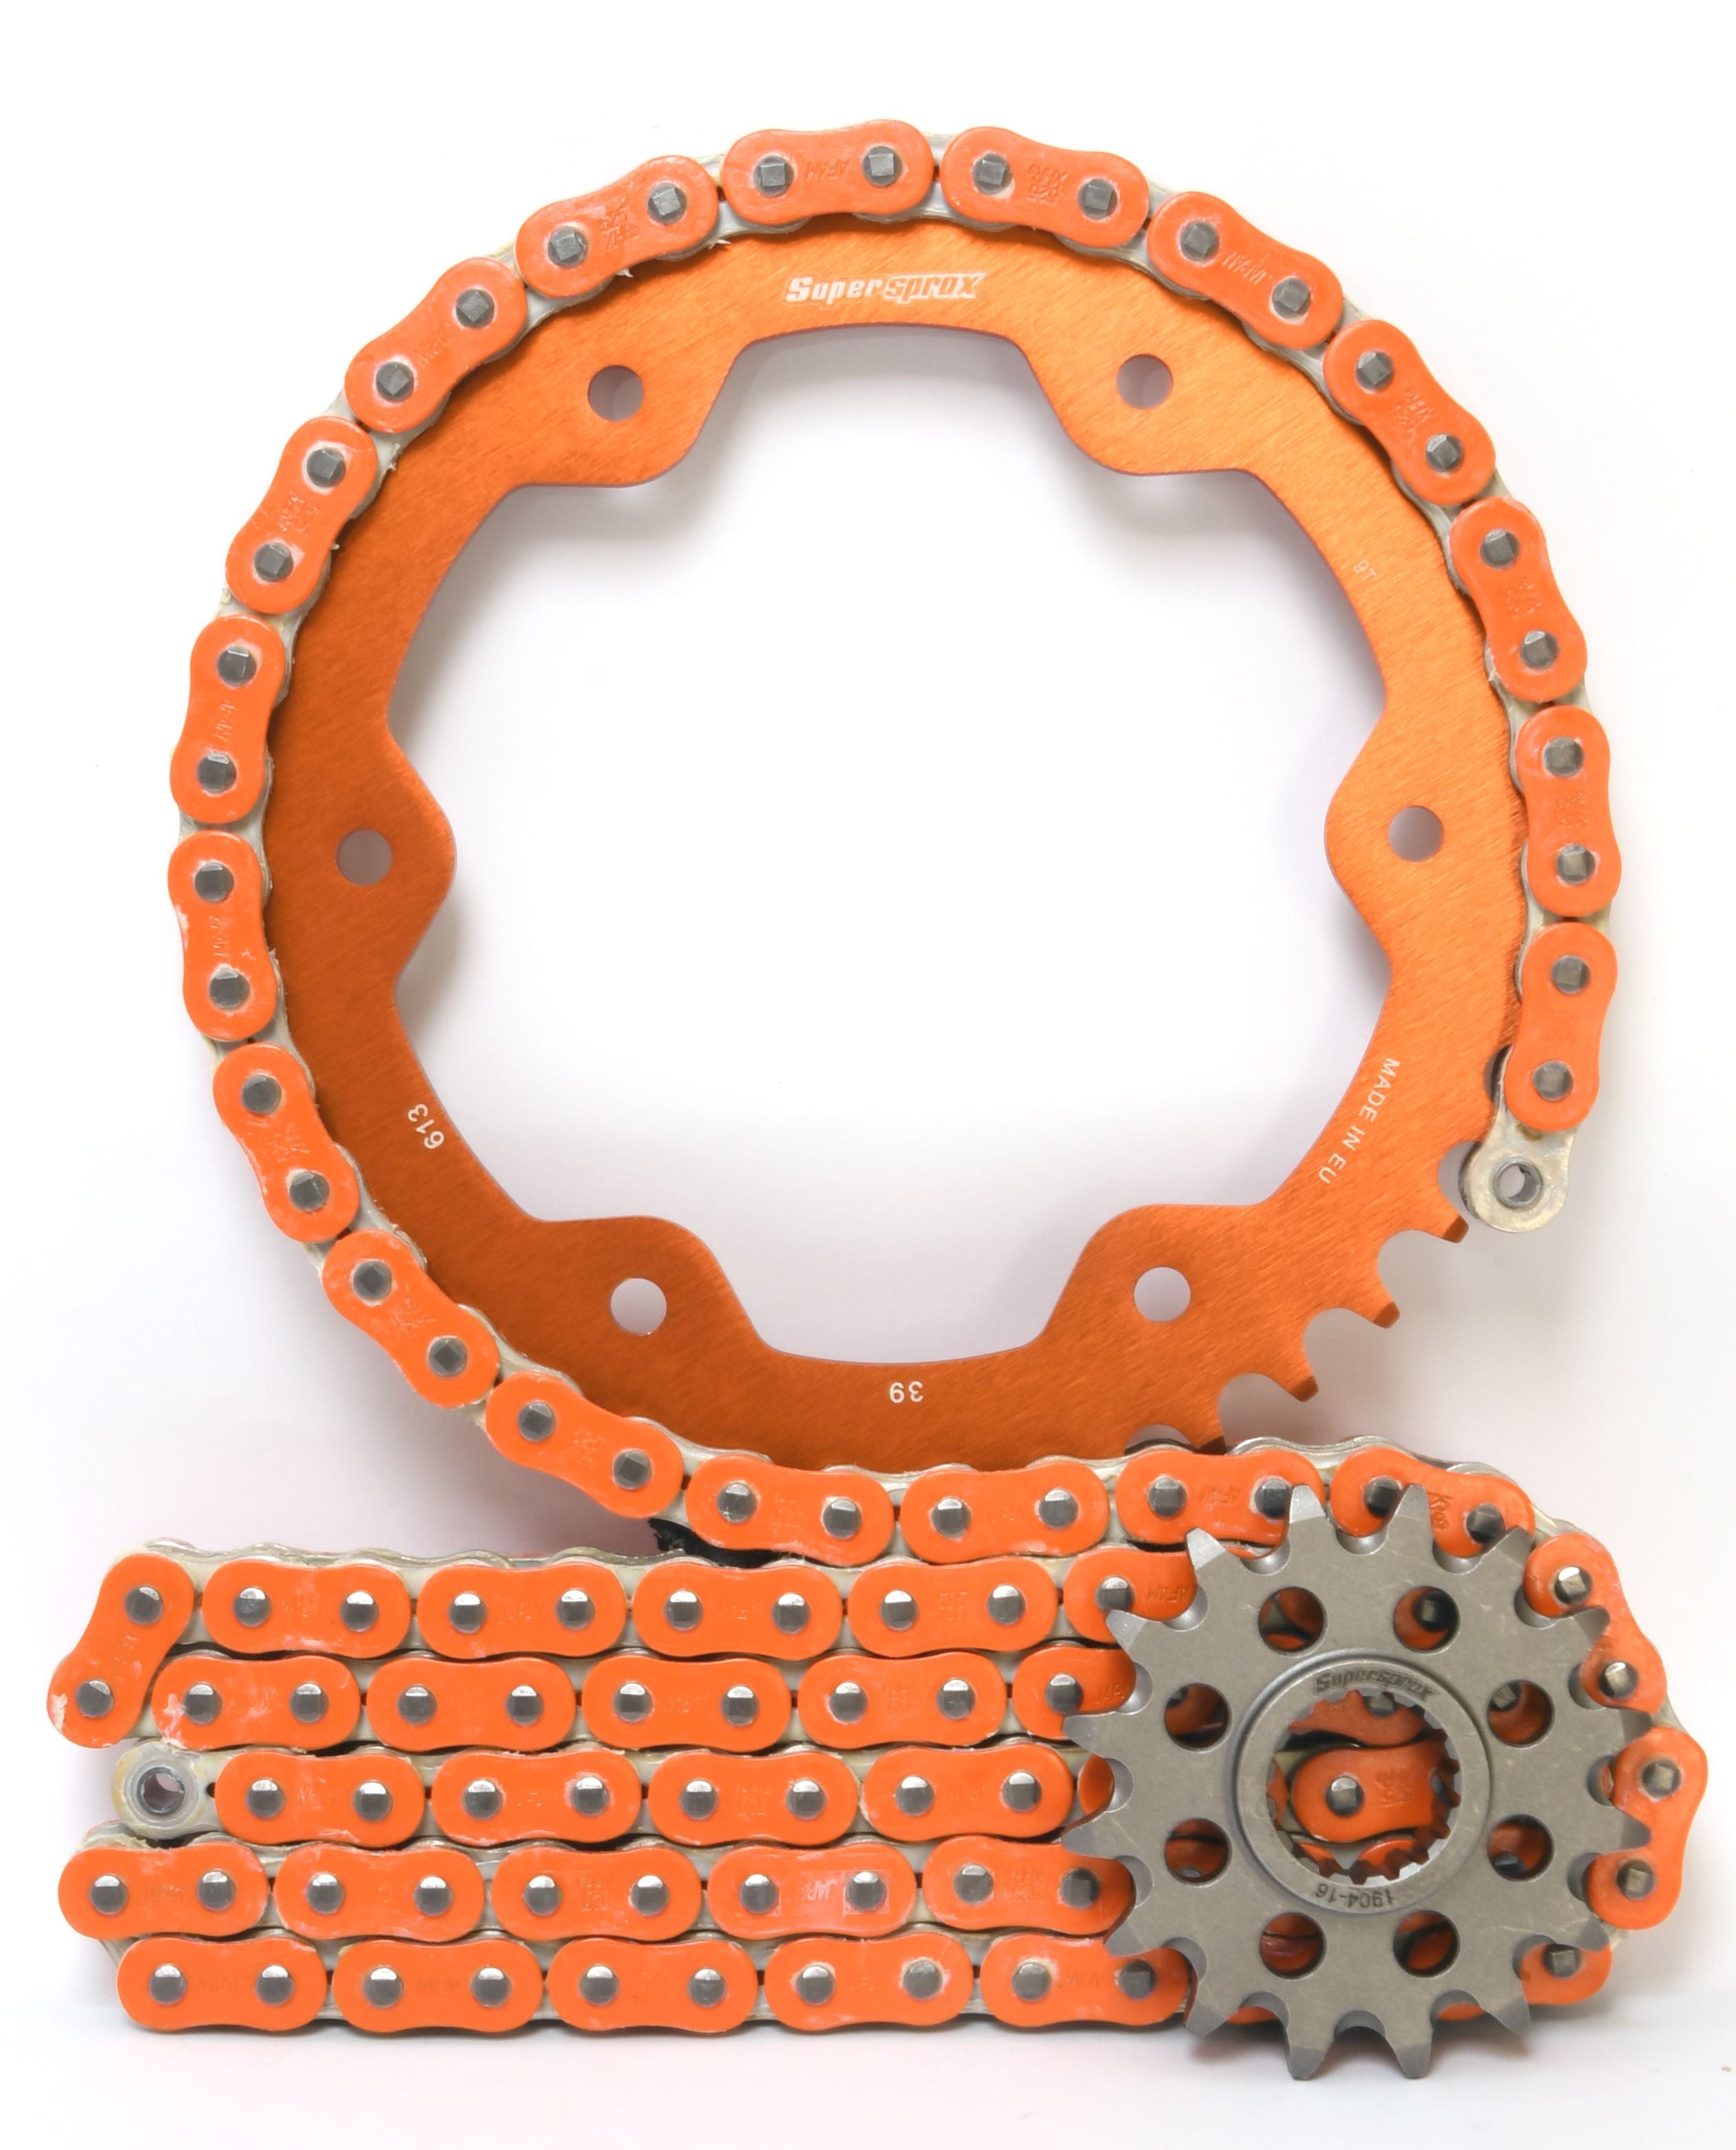 Supersprox Chain & Sprocket Kit for KTM 1290 Superduke - Choose Your Gearing